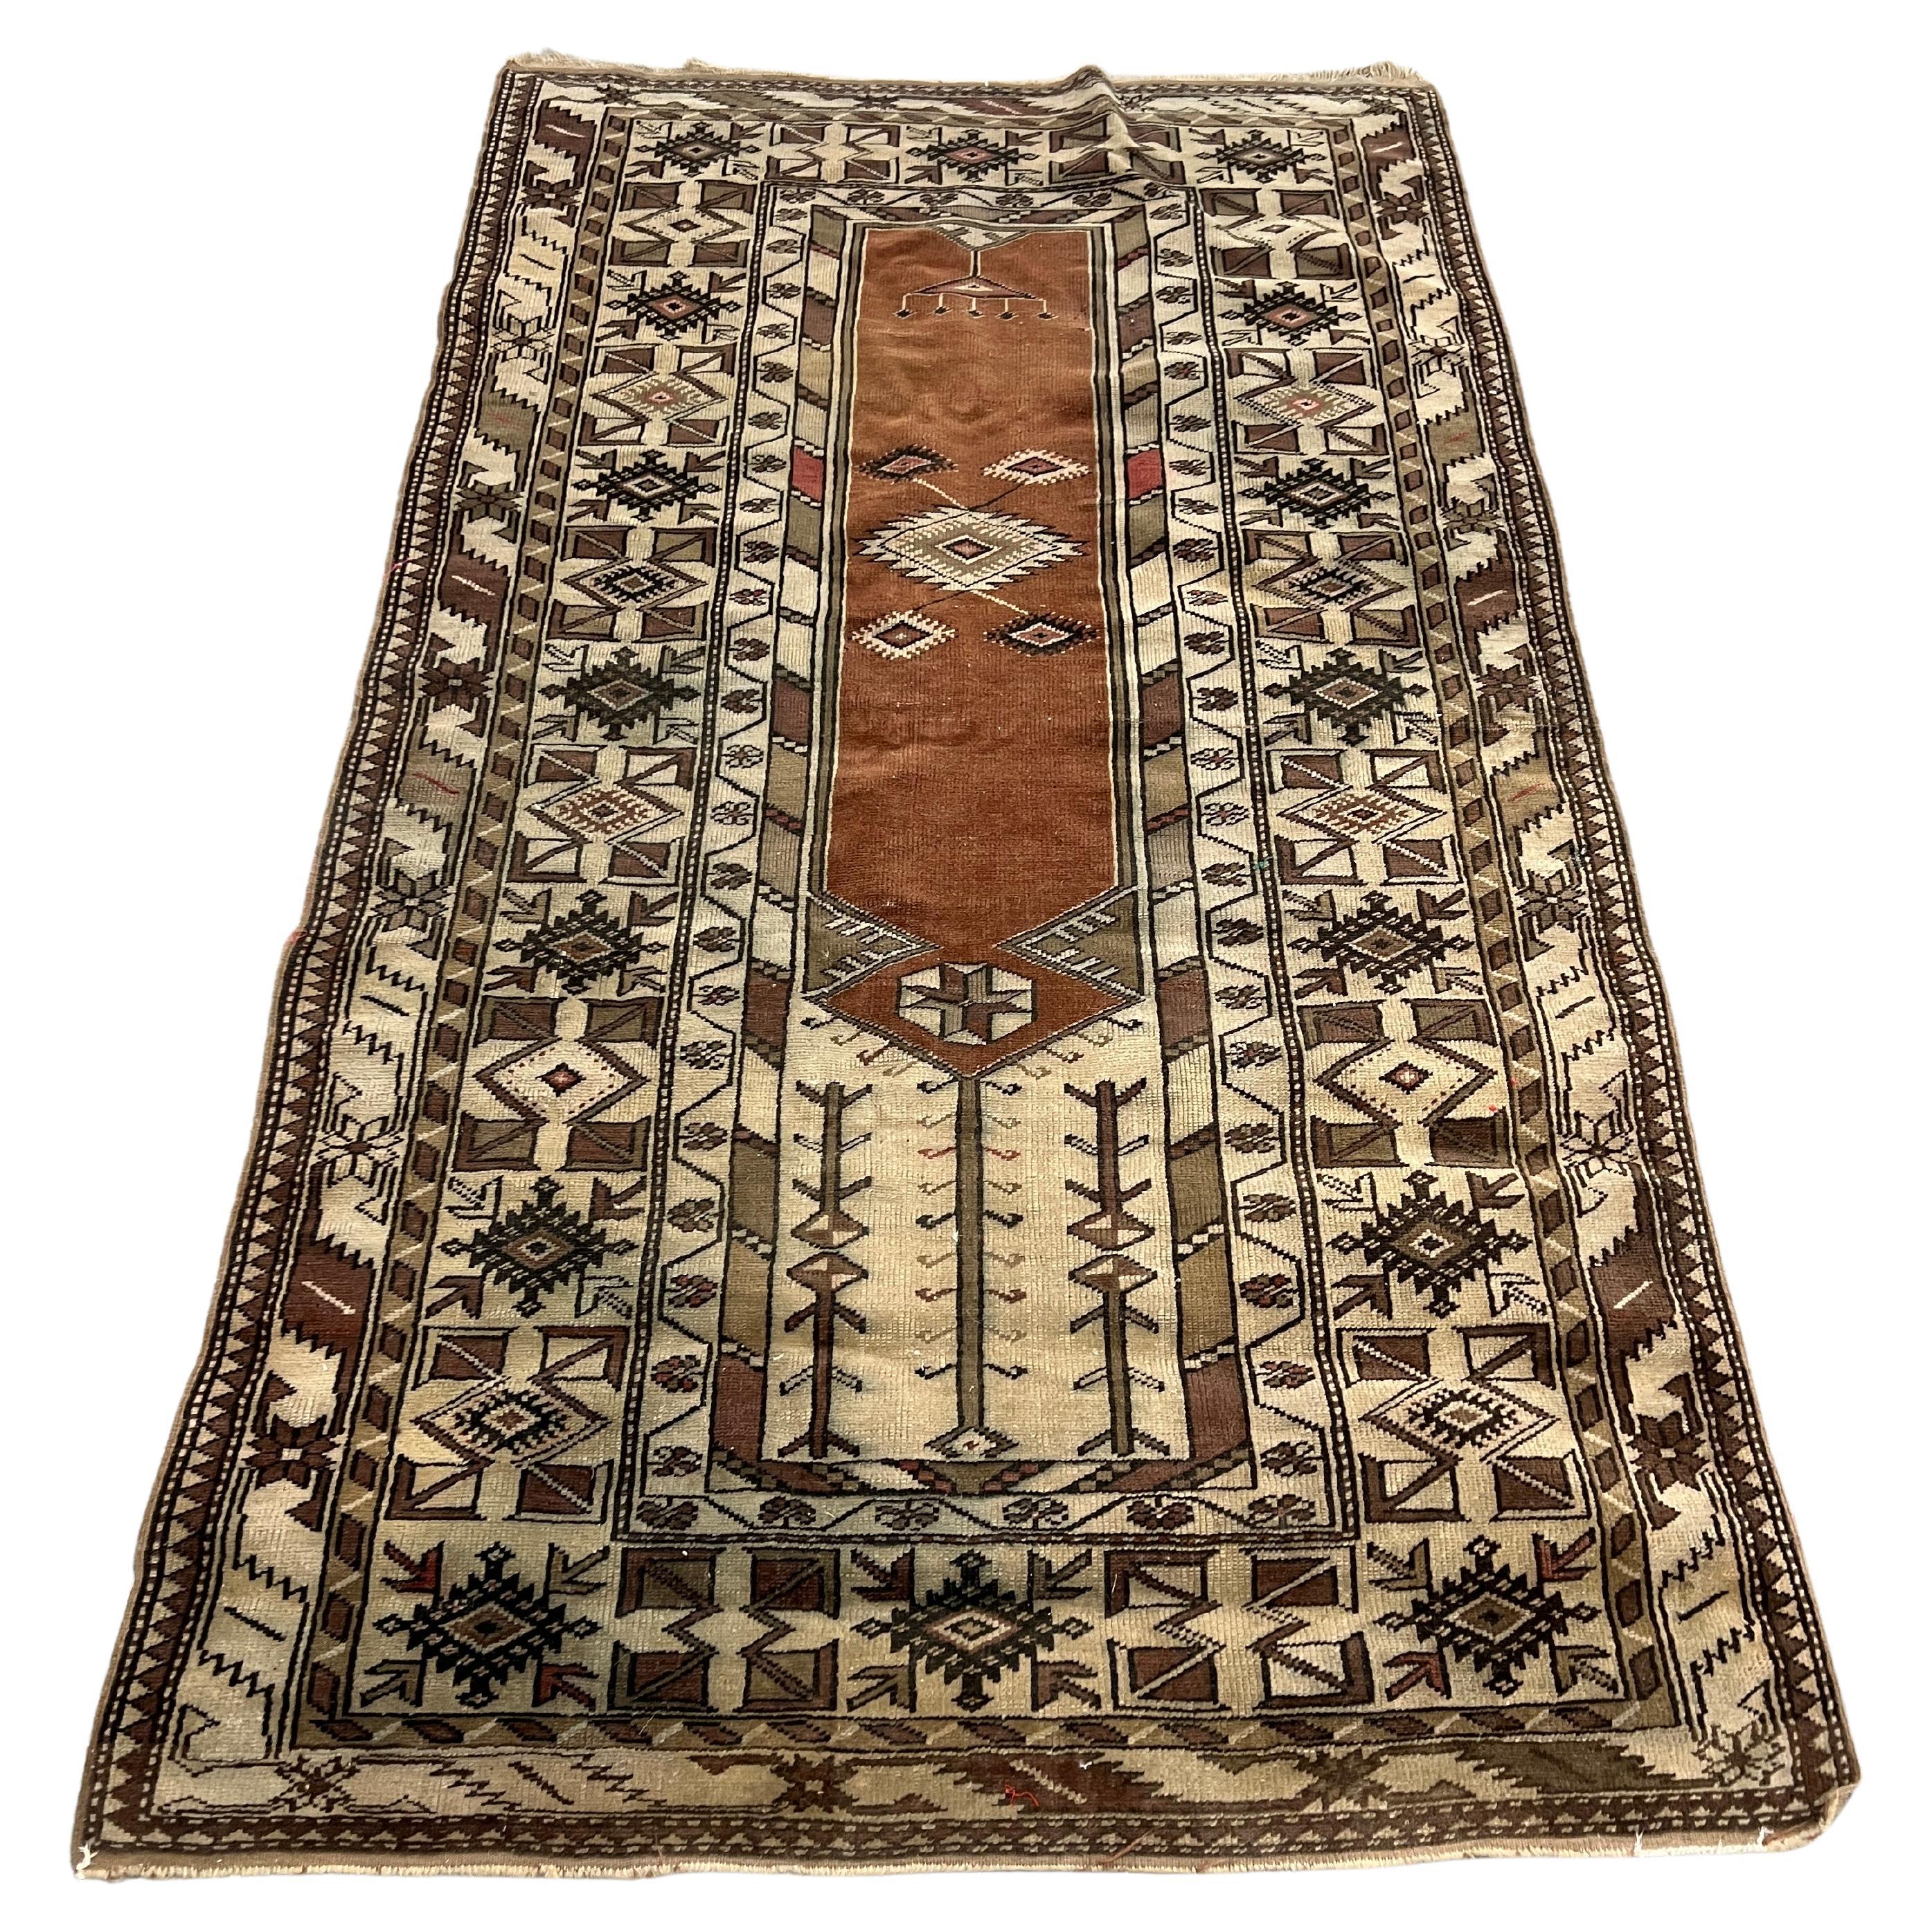 Antique Turkish Anatolian Wool Rug or Carpet  7'3" x 4'2" For Sale